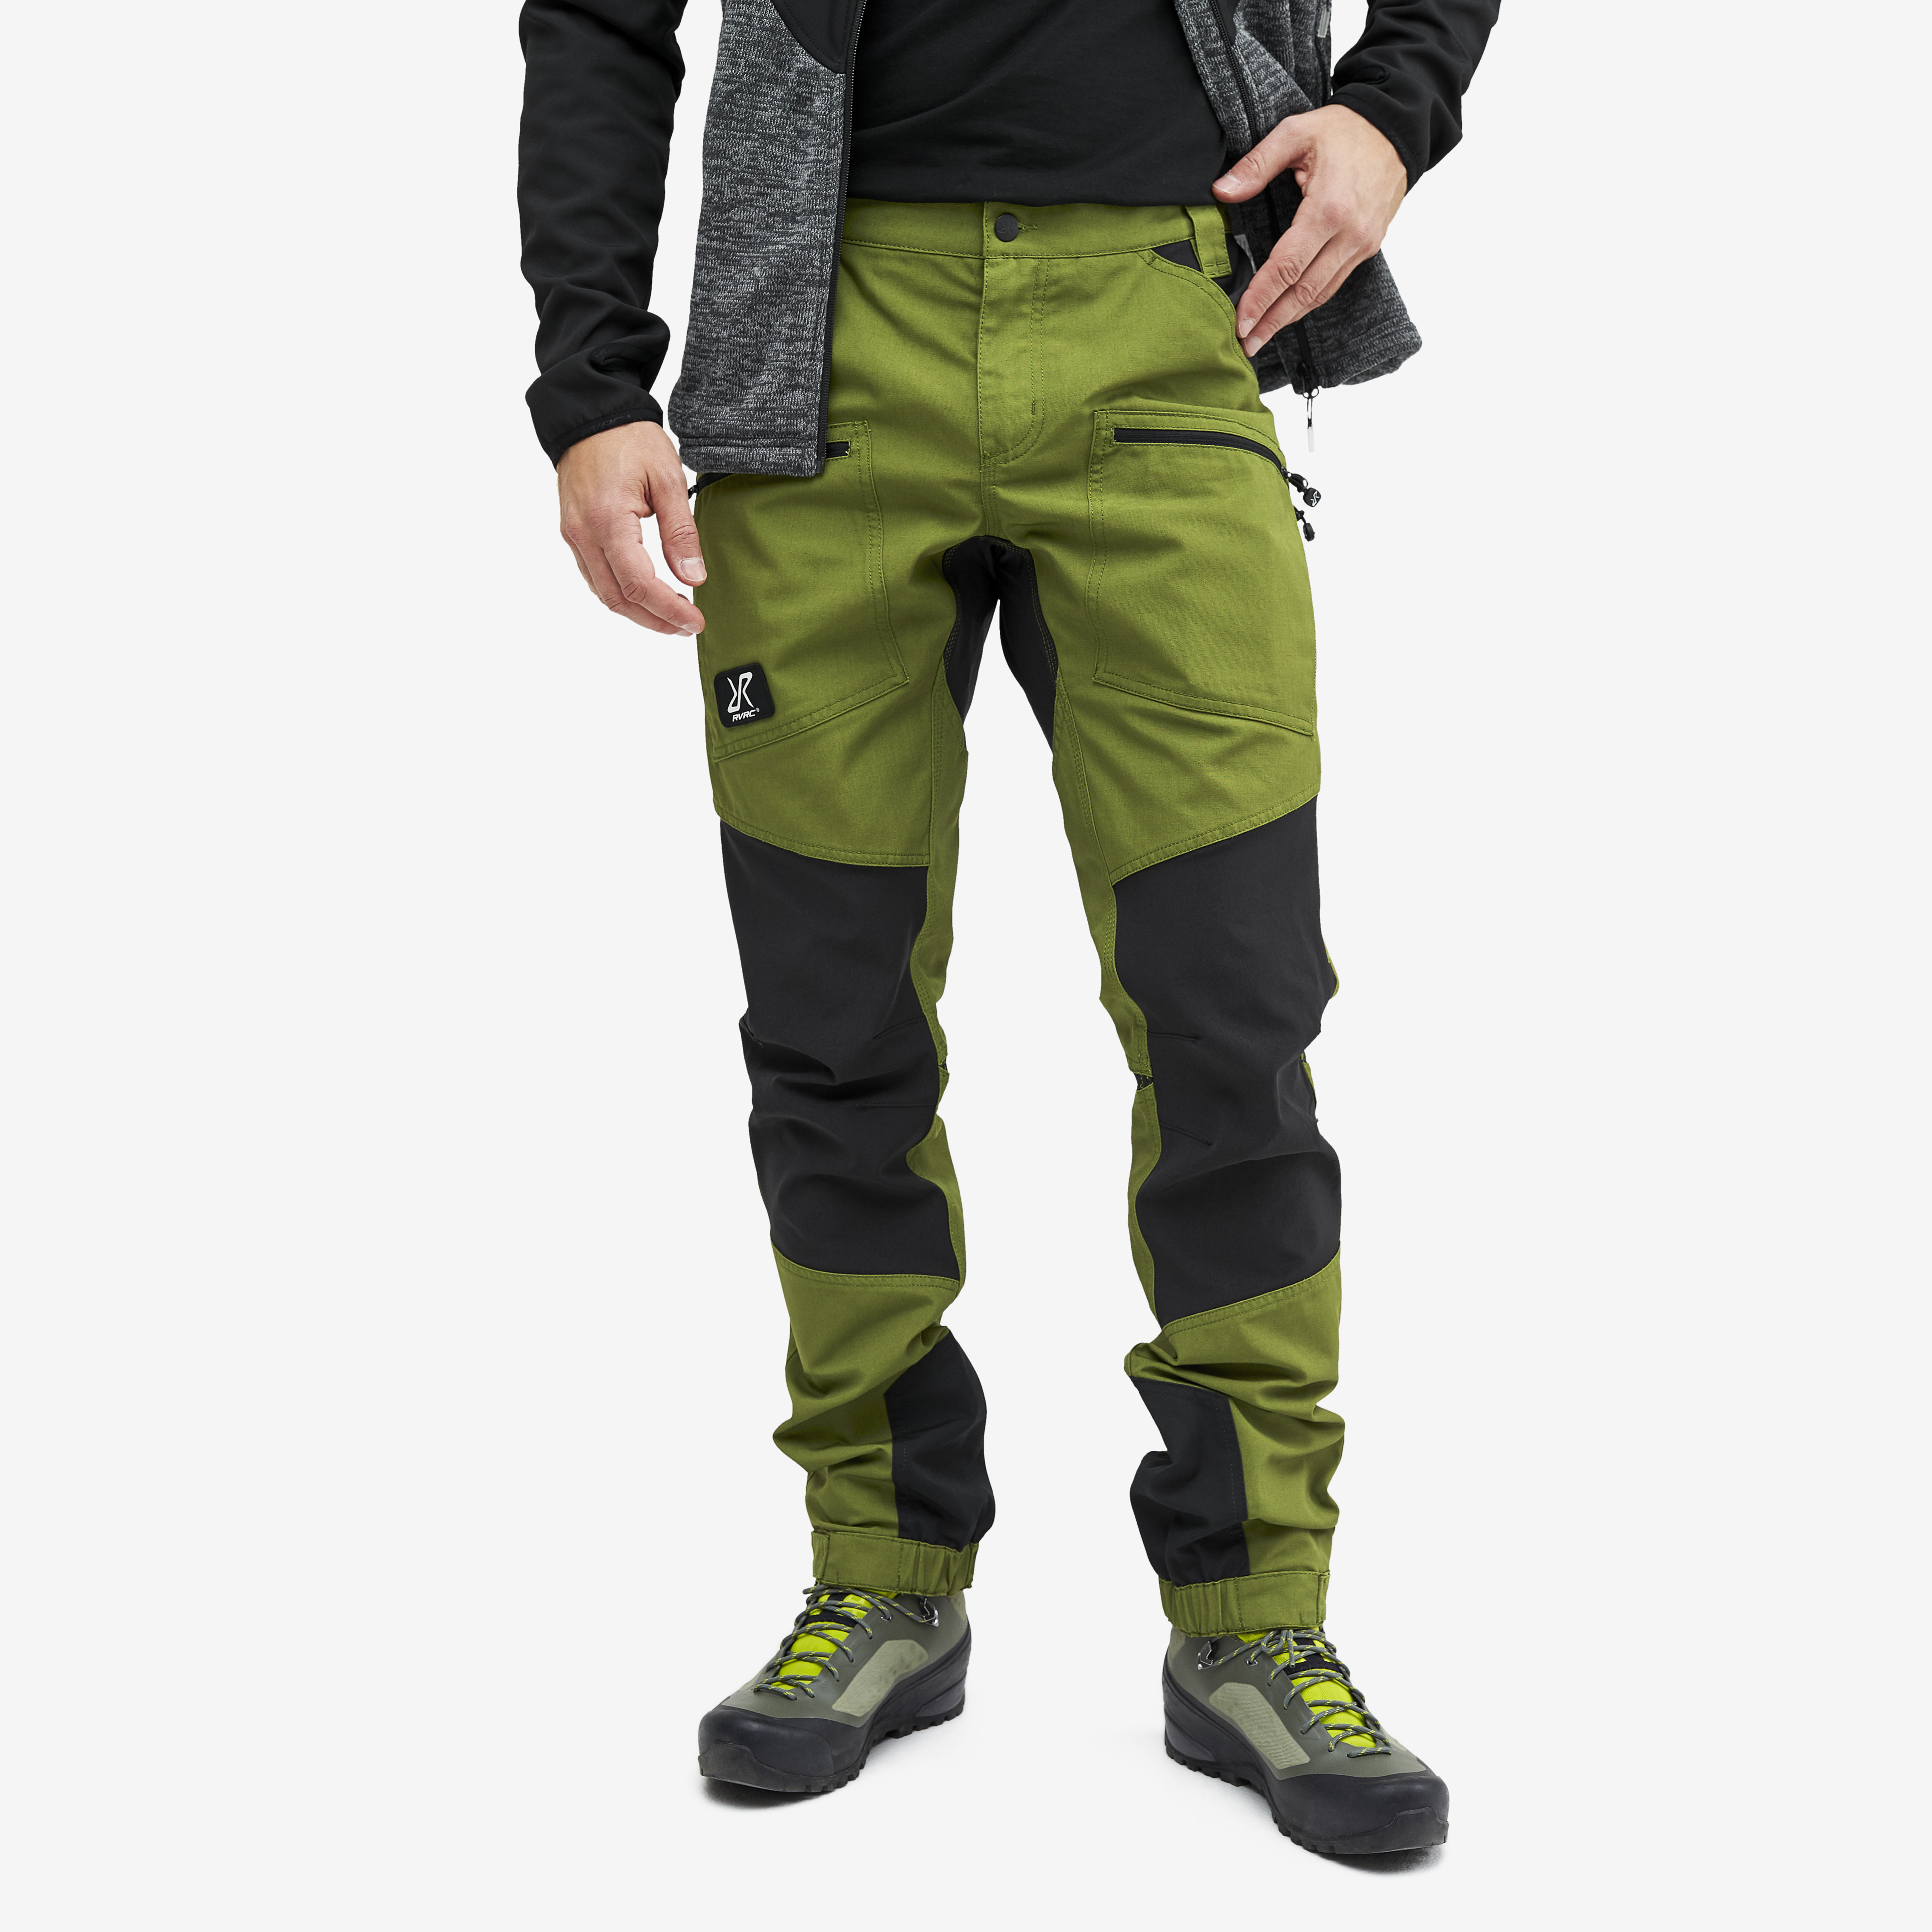 Nordwand Pro hiking trousers for men in green